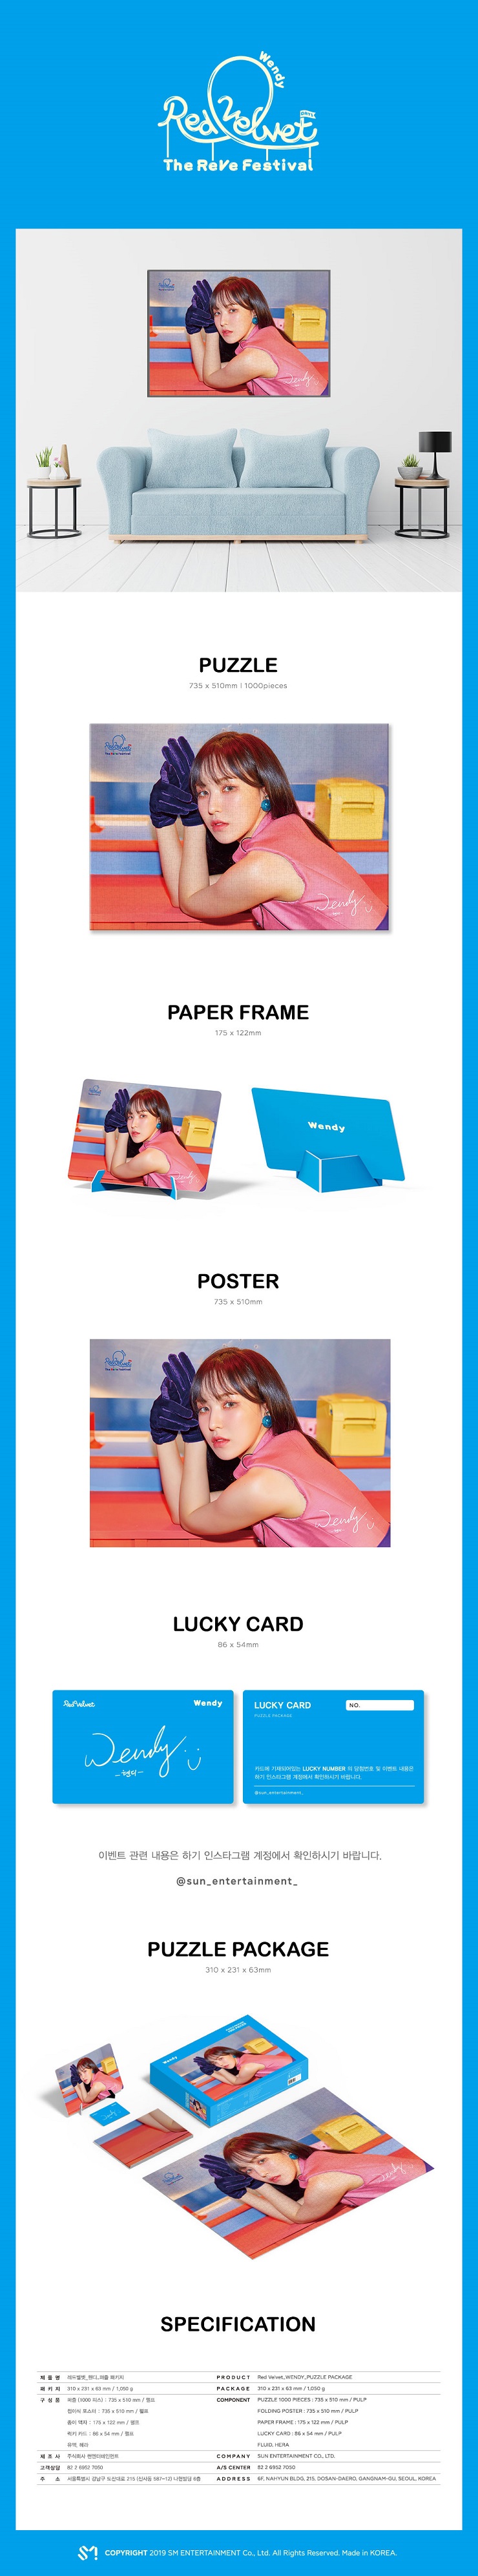 RED VELVET(레드벨벳) - PUZZLE PACKAGE [Wendy Ver.]